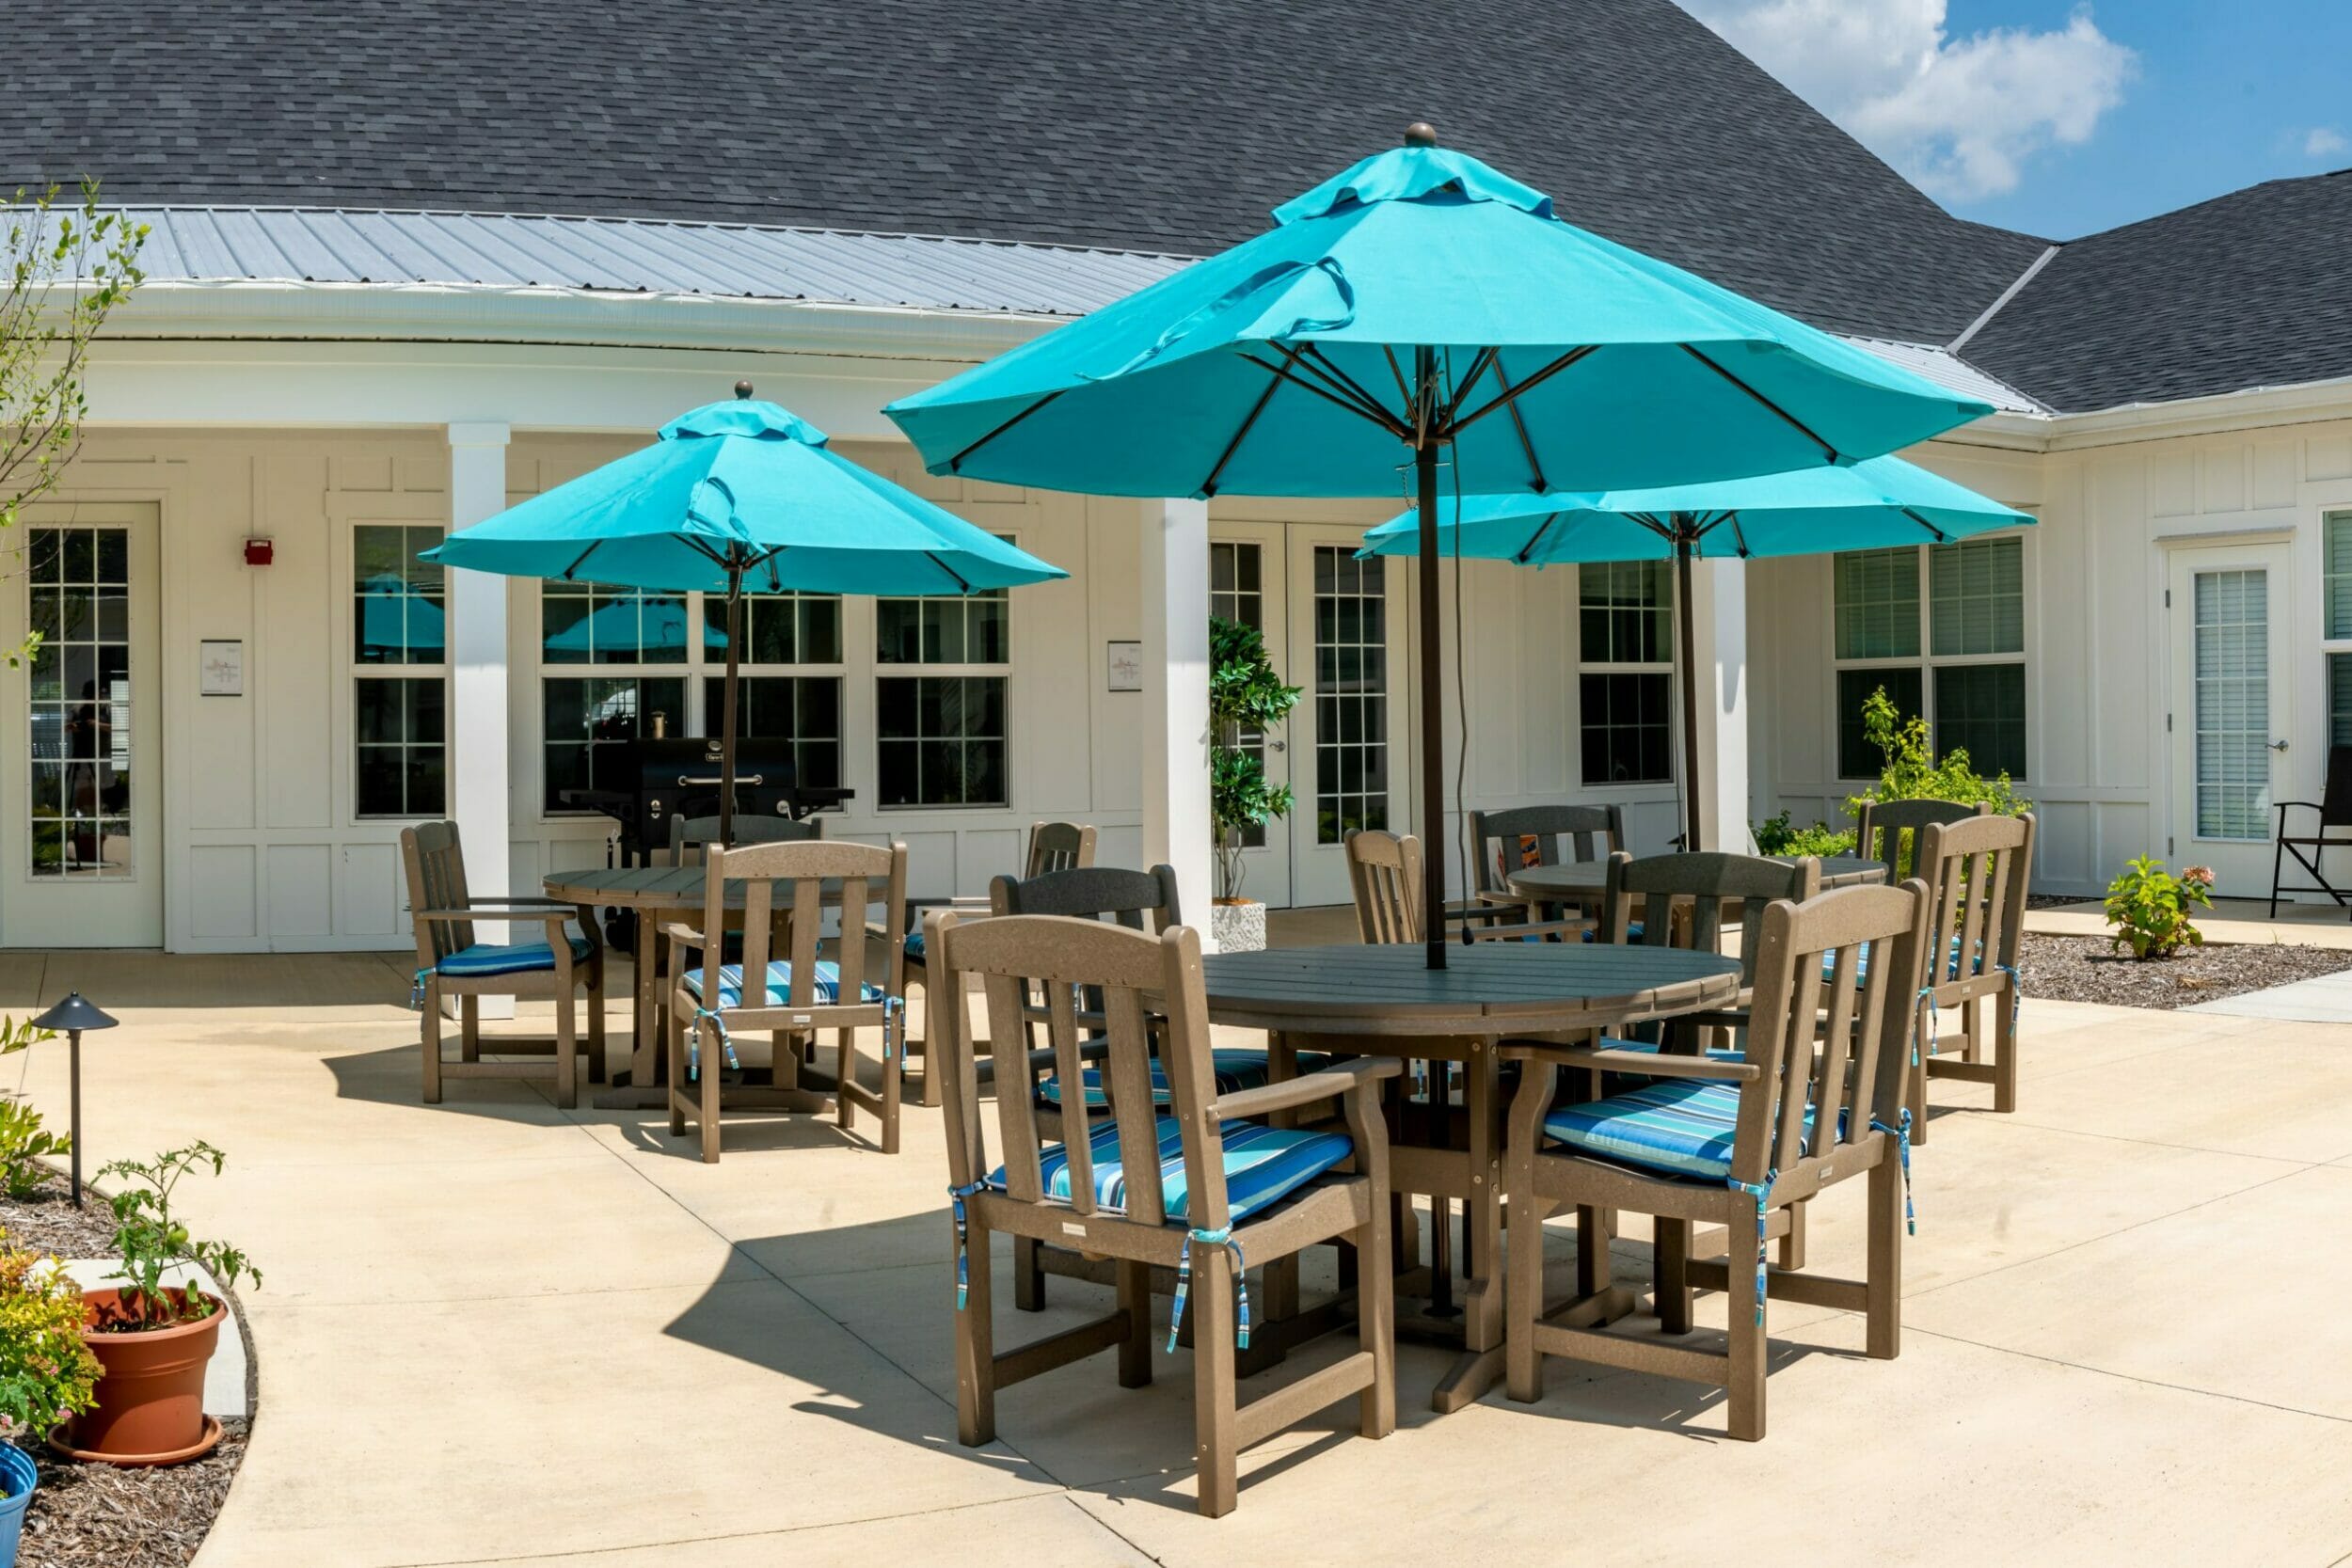 Outdoor patio with tables and chairs with teal umbrellas with plants